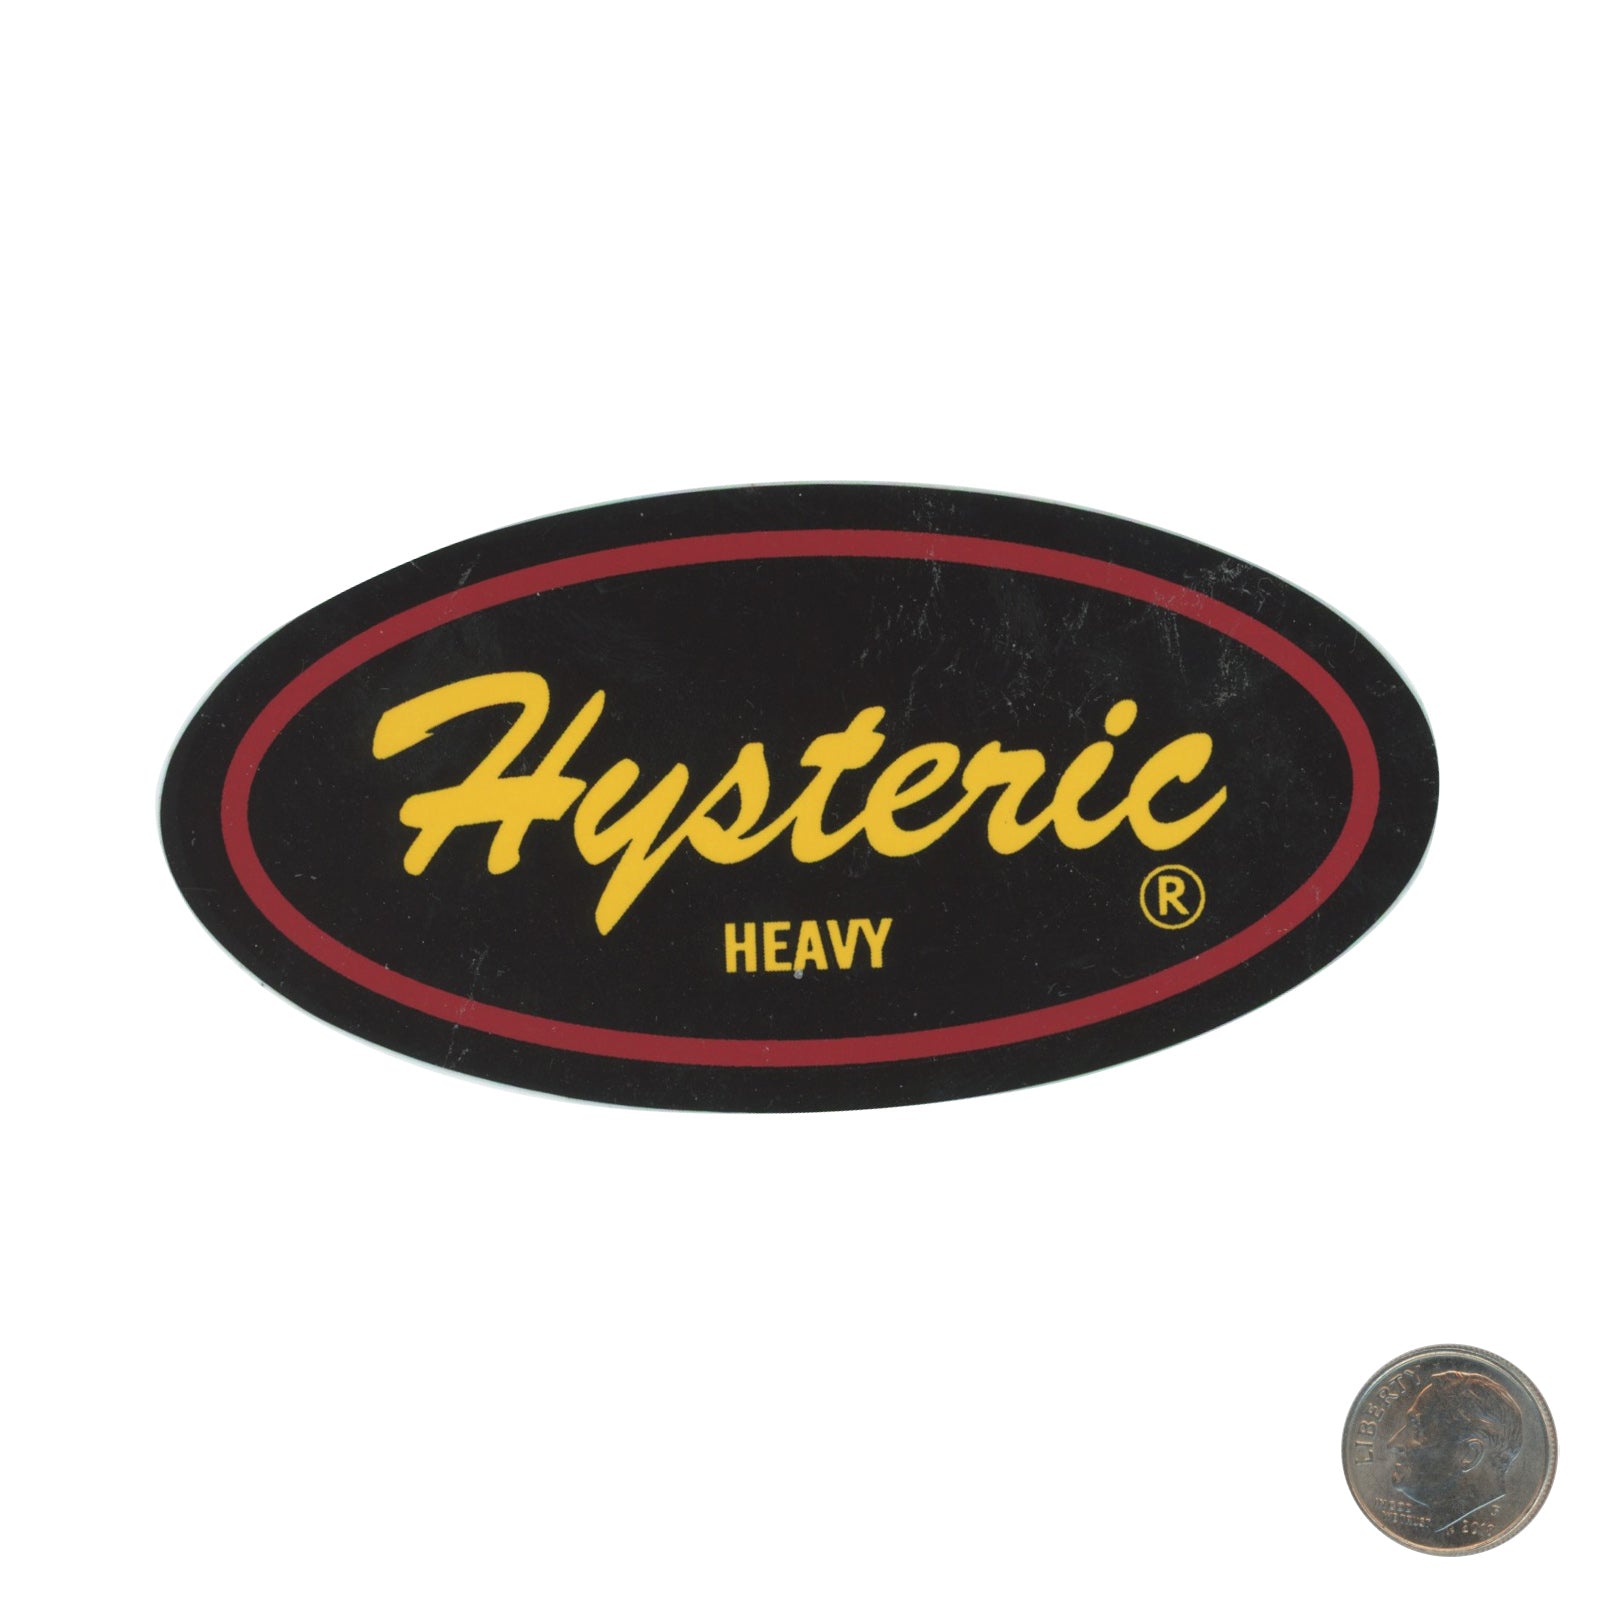 Hysteric Heavy Yellow Black Sticker with dime